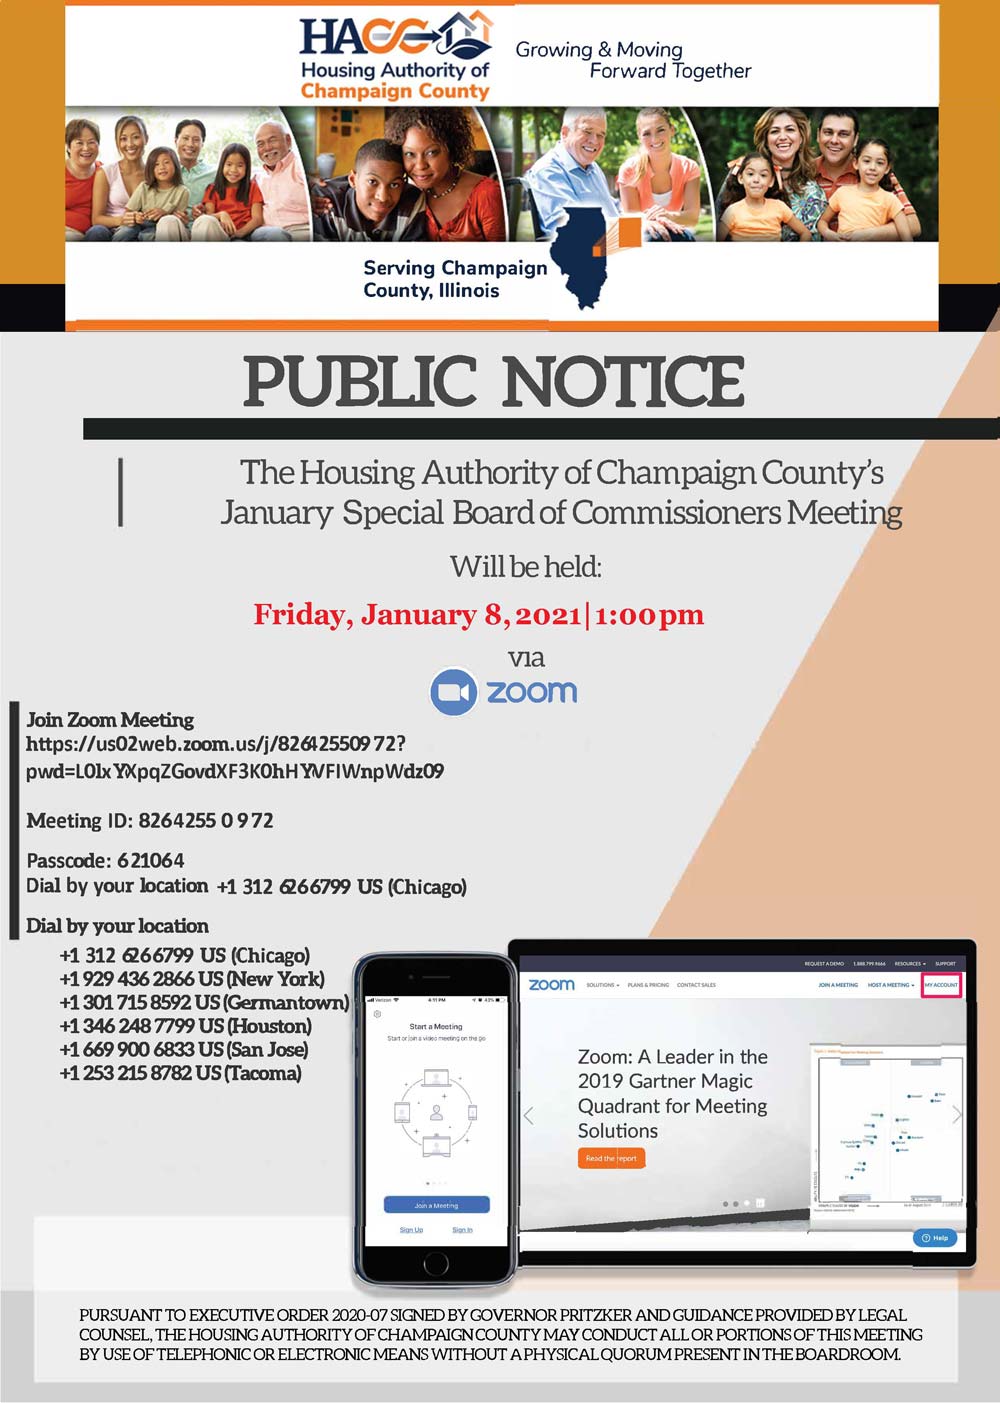 January Special Board of Commissioners Meeting Flyer, all information as listed below.